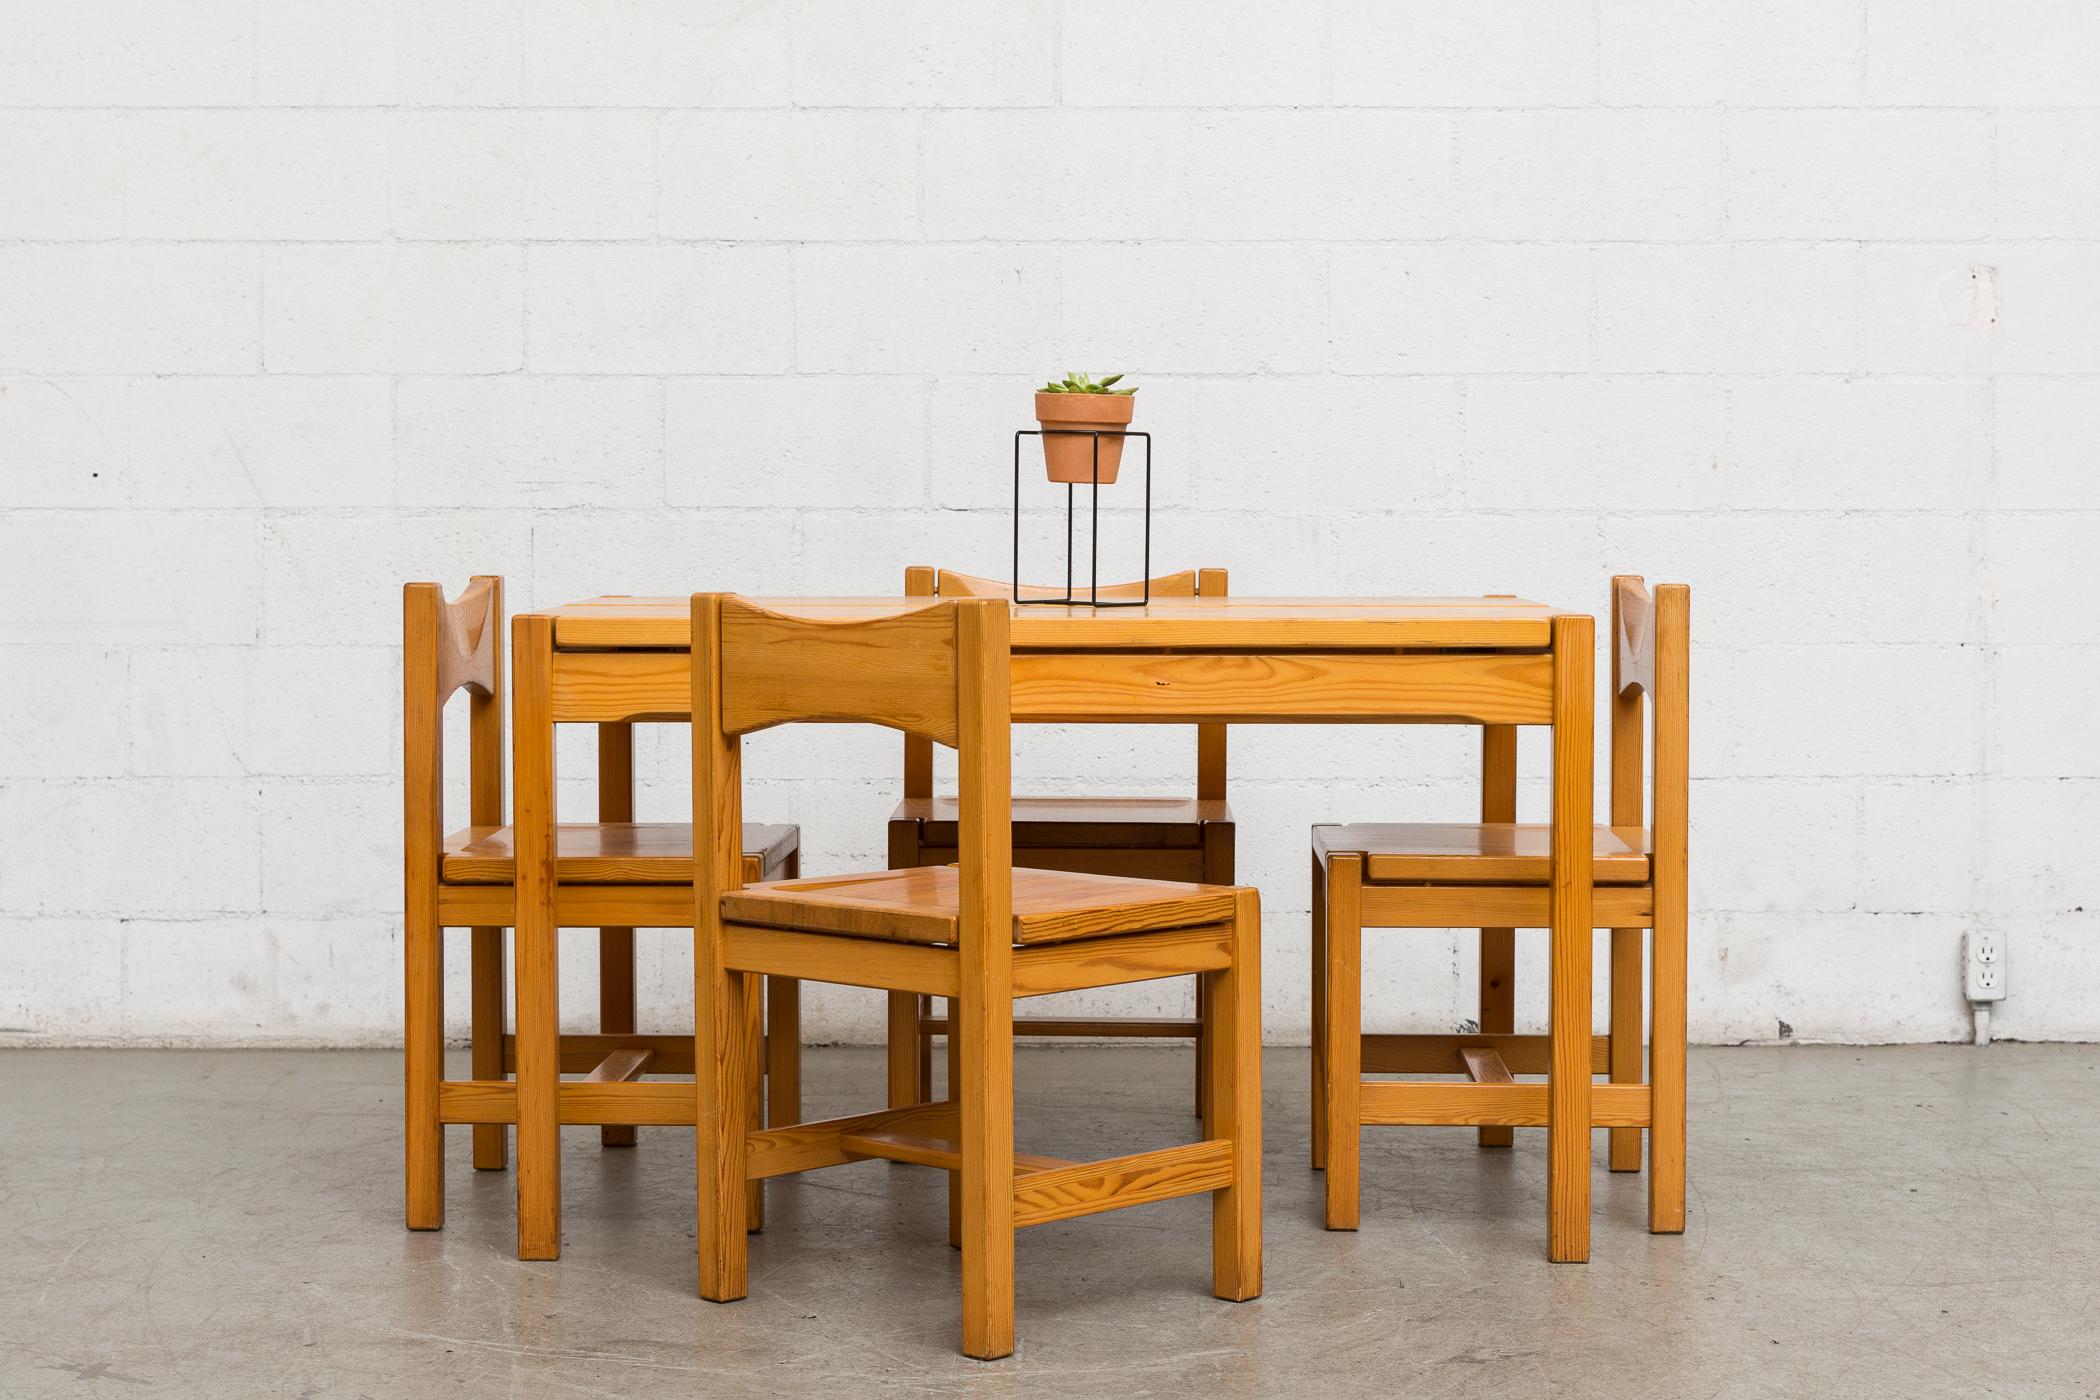 Midcentury pine dining set inspired by Ilmari Tapiovaara. Set consists of one dining table and four matching chairs. Lightly refinished. Good original condition. Set price. Chairs measure: 17.25 x 16.25 x 17/29.5.